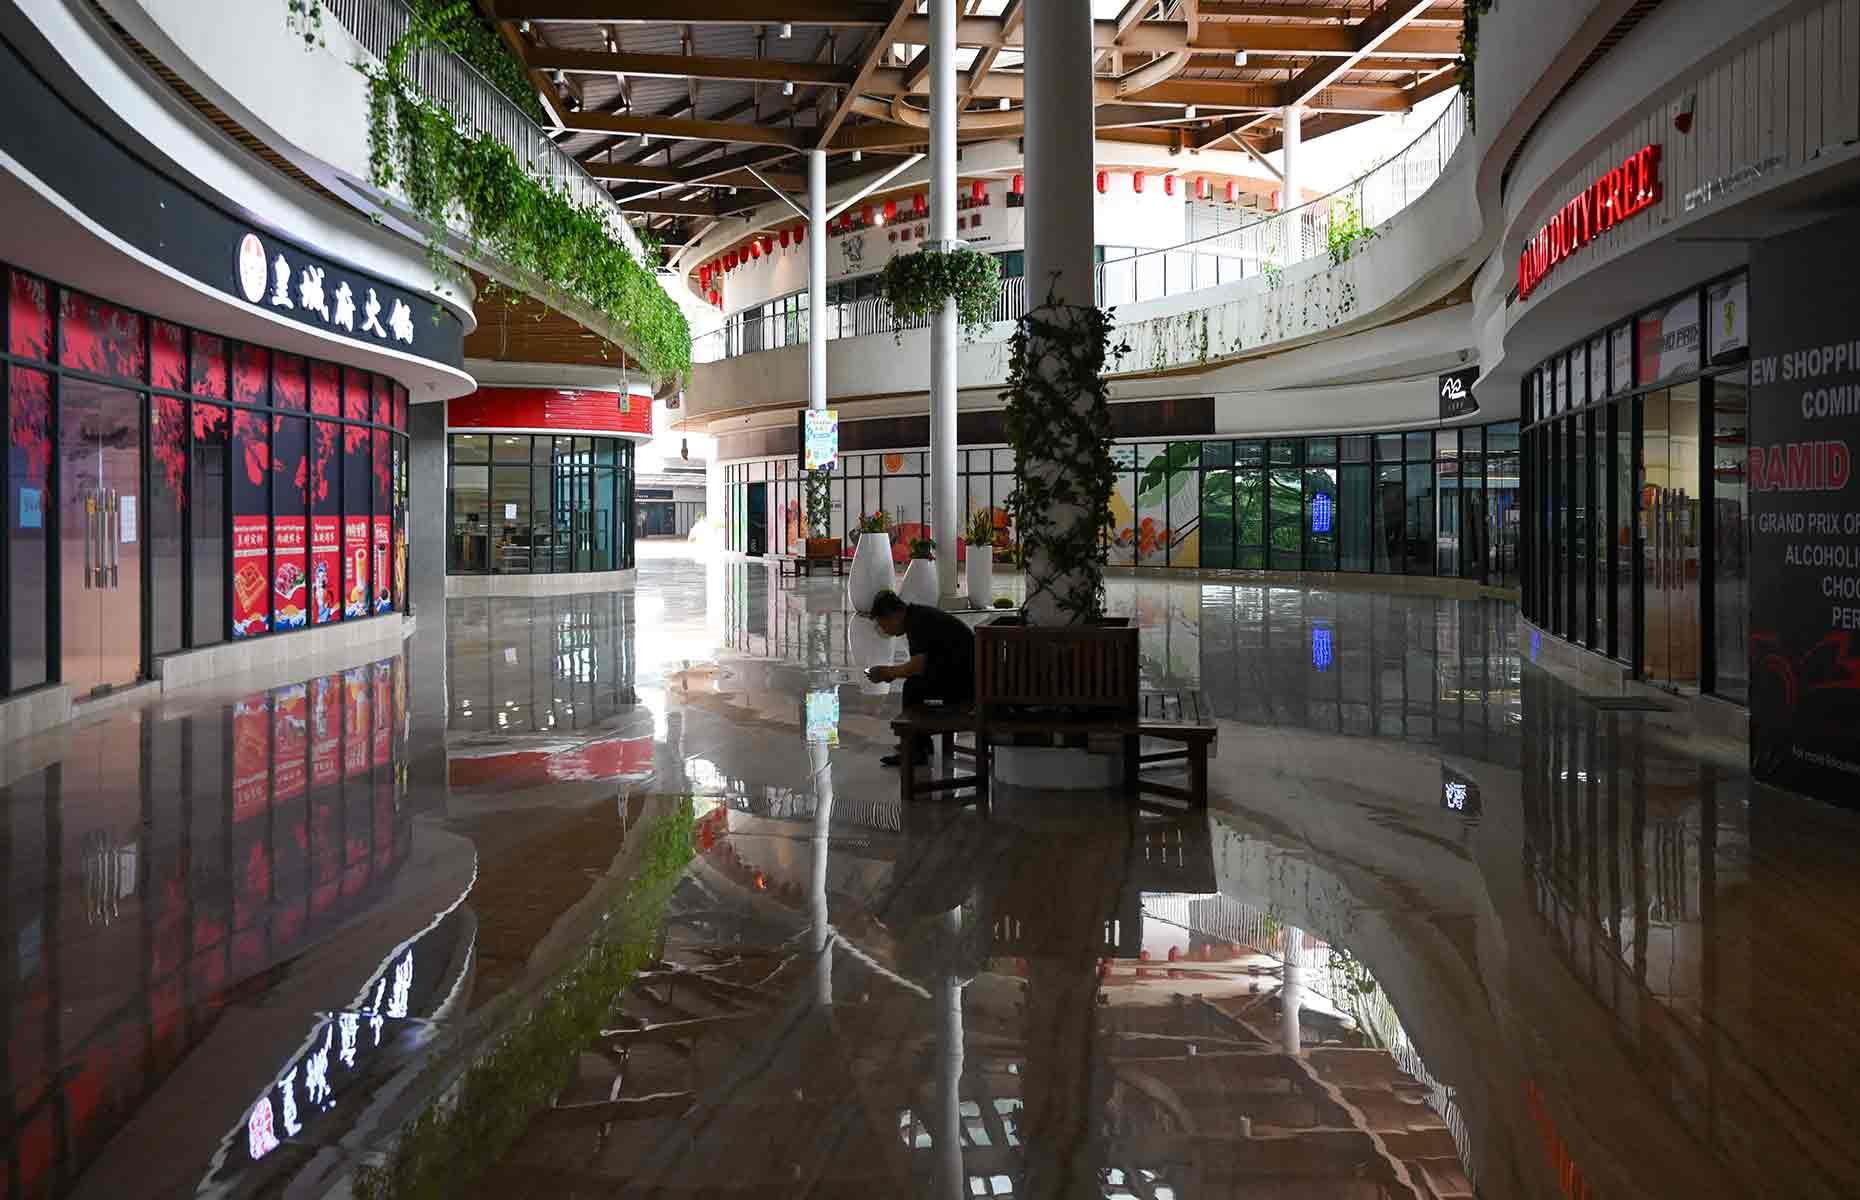 <p>In the deserted shopping mall, many of the stores and eateries are shuttered, some having never opened their doors in the first place. Forest City's duty-free status was intended to draw in punters, yet the anticipated crowds still haven't materialised. </p>  <p>The future of Forest City appears to be hanging in the balance. If Country Garden goes into liquidation, it's unclear who, if anyone, will take on the mantle of finishing the enormous project. Could this metropolis, once advertised as a "green living paradise," be reduced to a failed utopia? Only time will tell. </p>